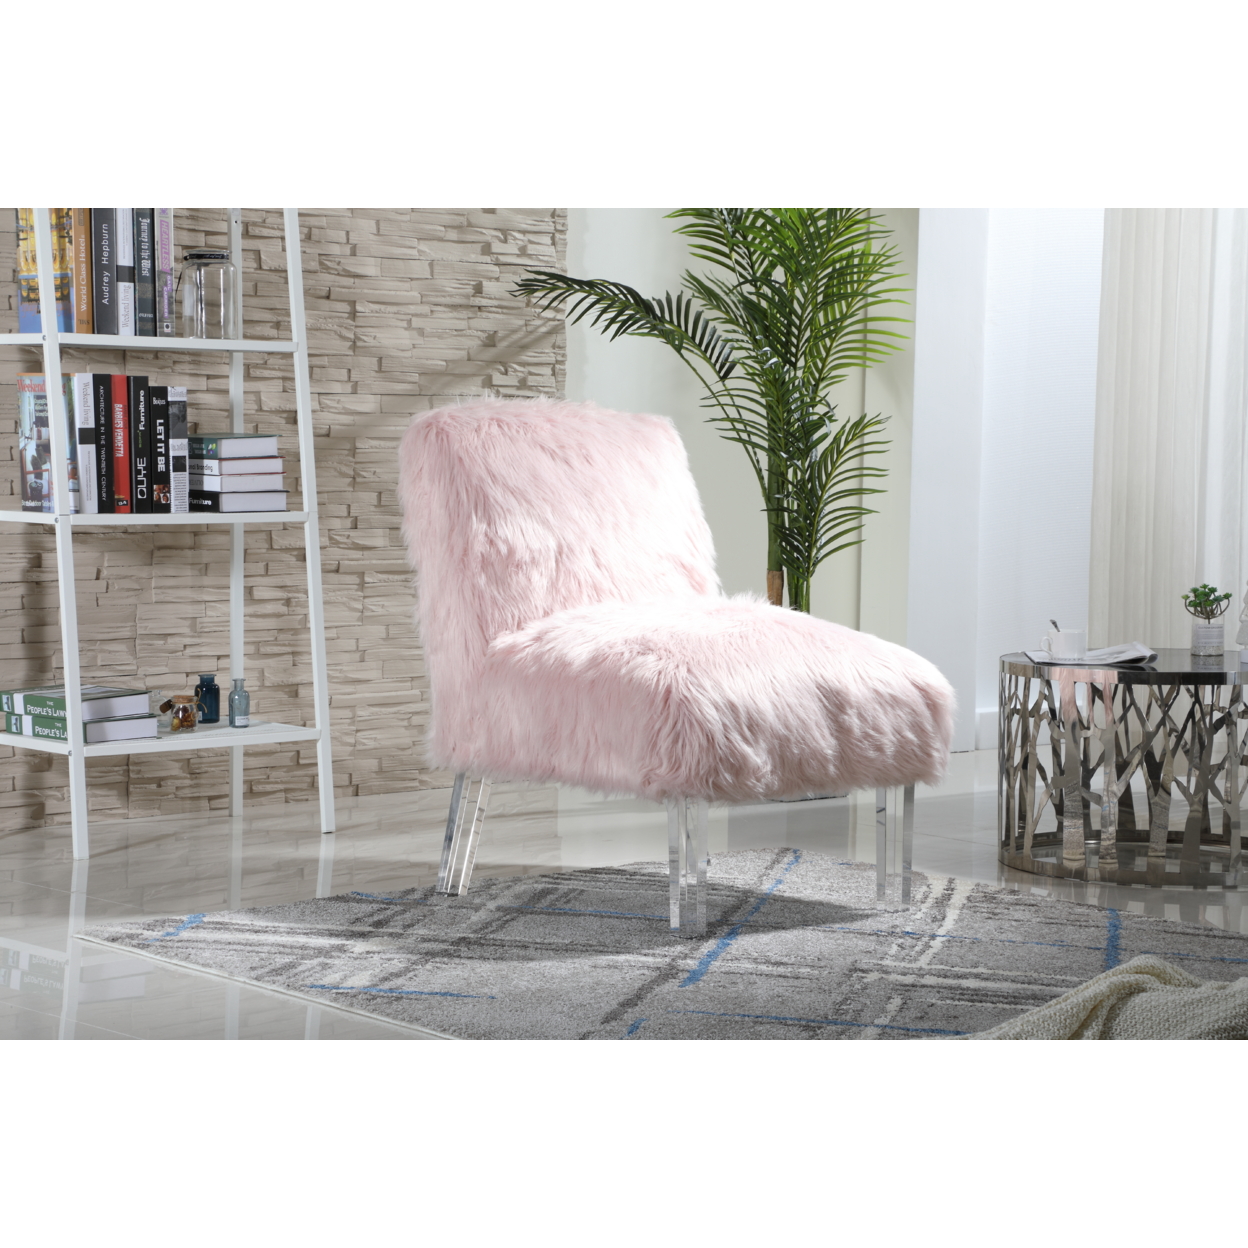 Iconic Home Filipe Accent Side Chair Sleek Stylish Faux Fur Upholstered Armless Design Acrylic Legs - Pink